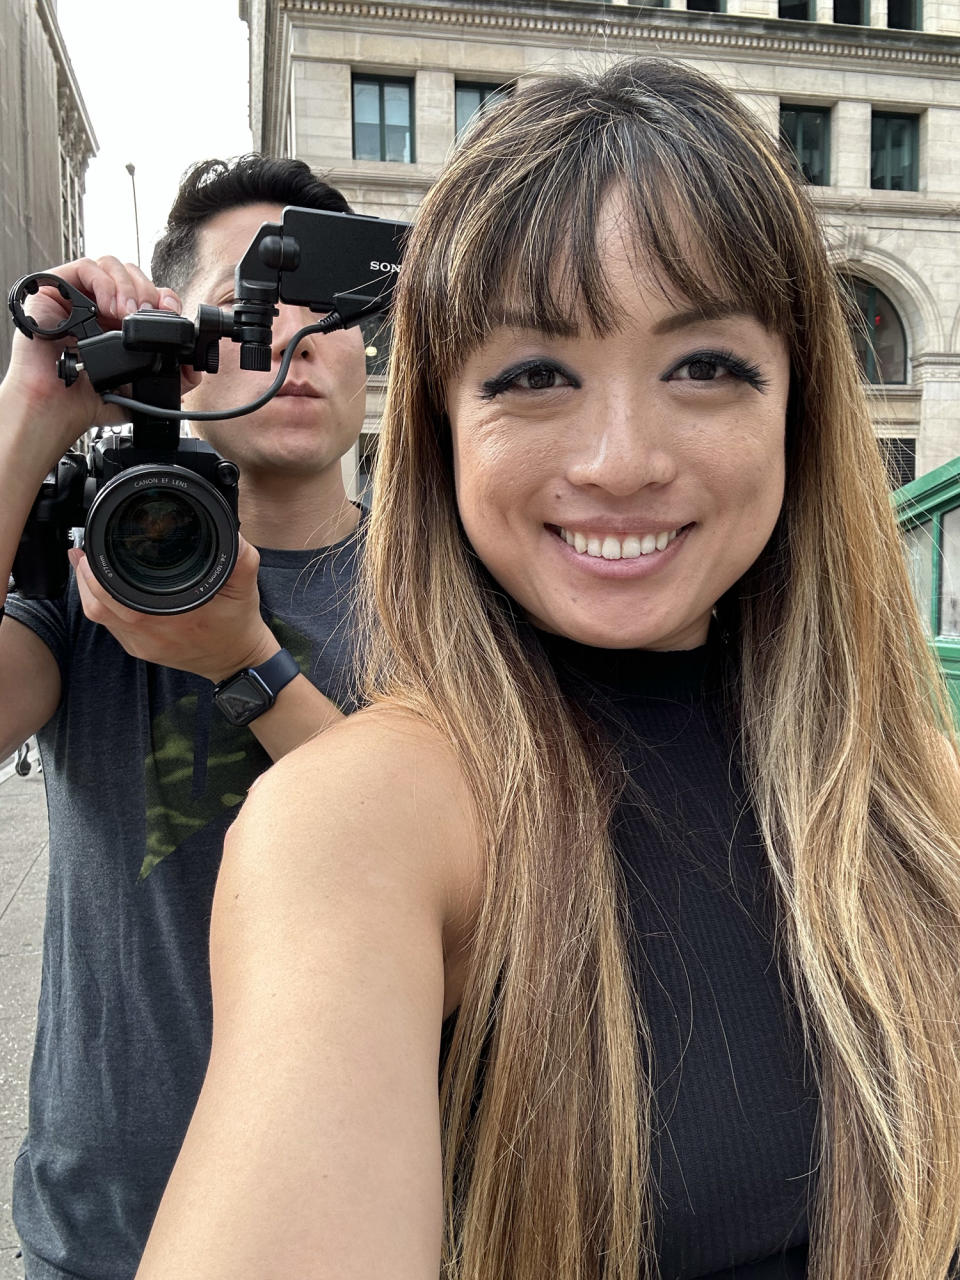 <p>A photo from the iPhone 14 Pro's front camera of a smiling woman and a man holding up a video camera.</p>
